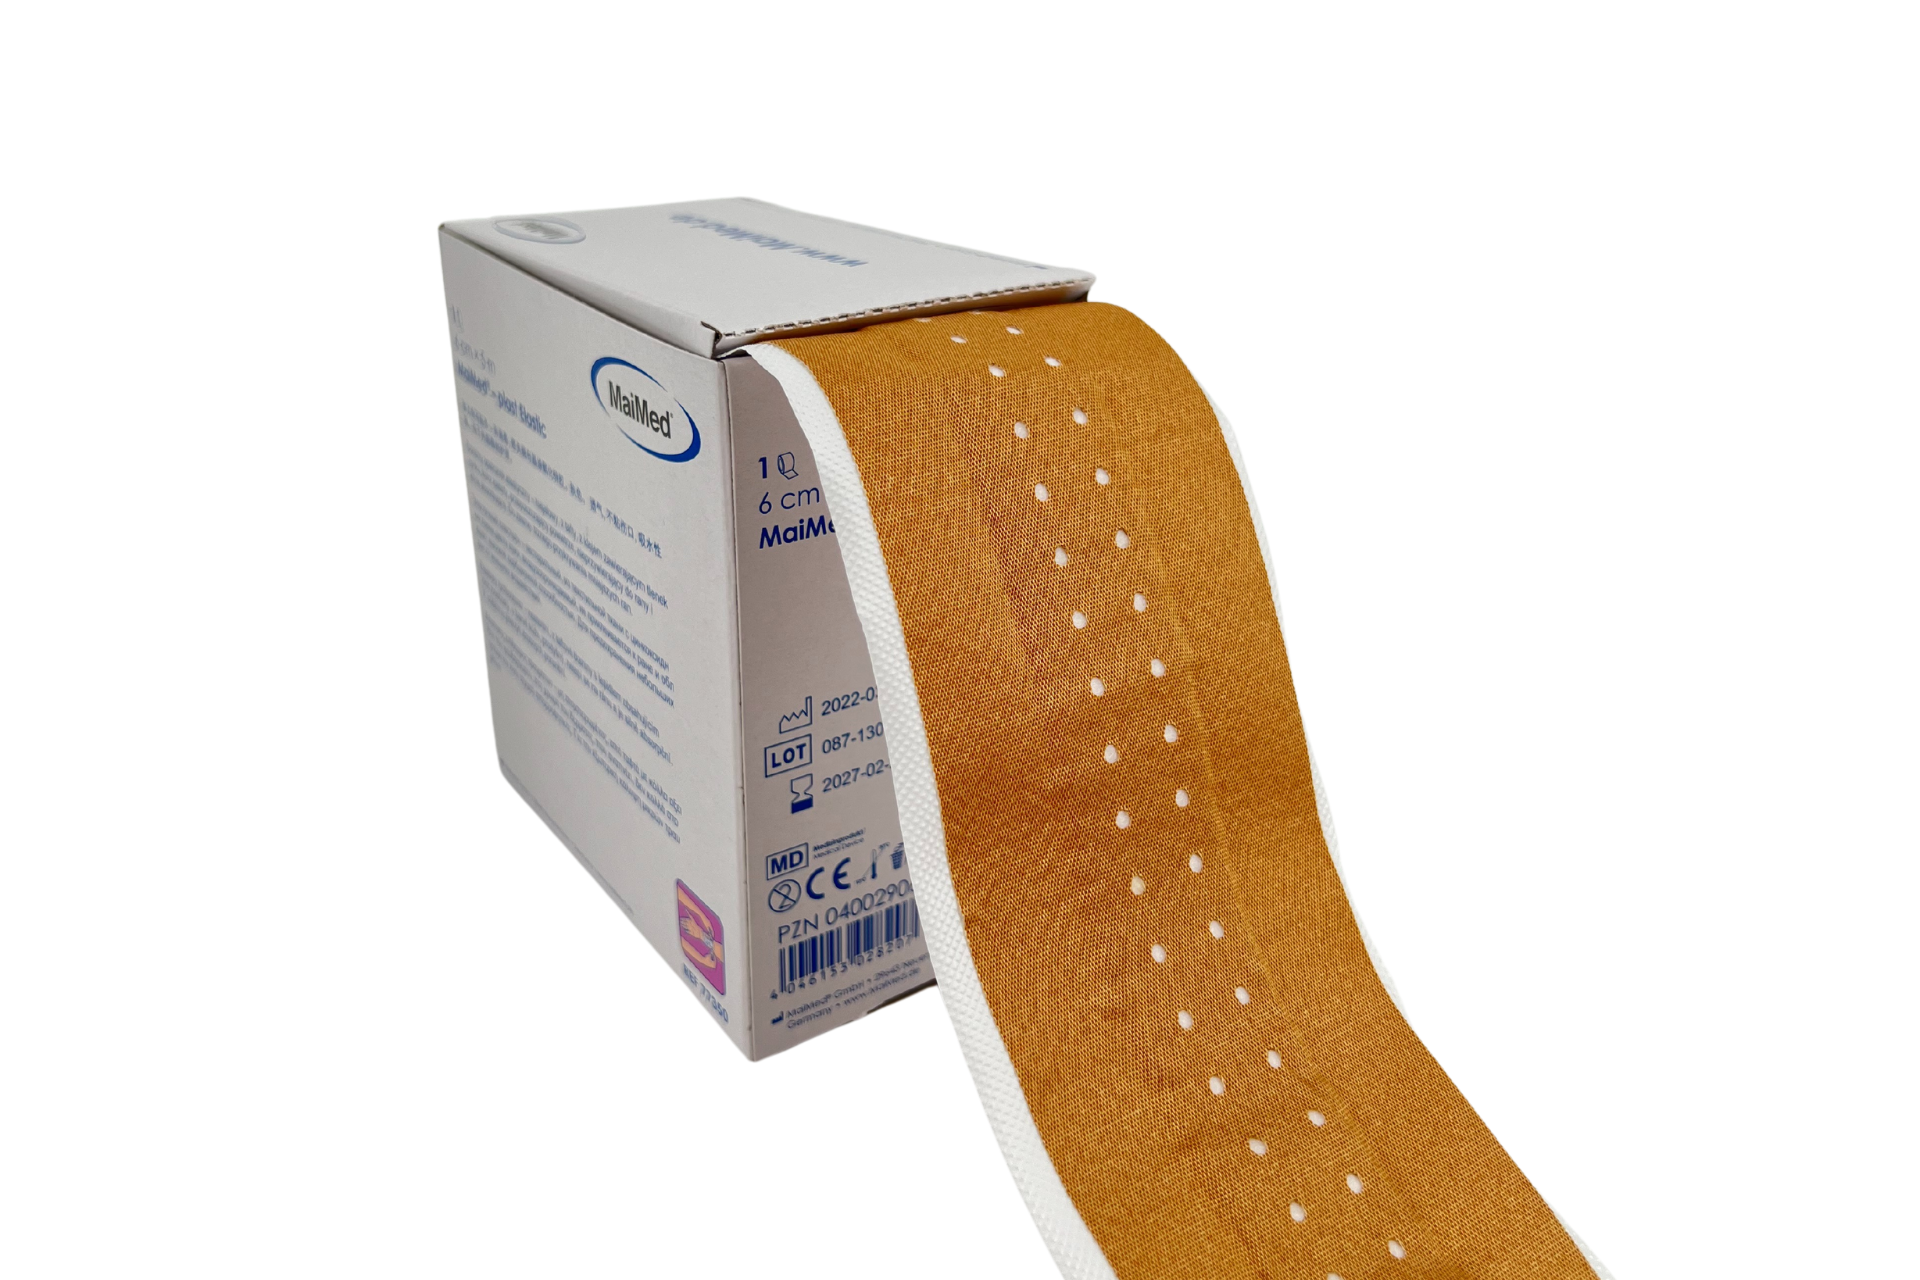 Wound dressing skin-colored or white